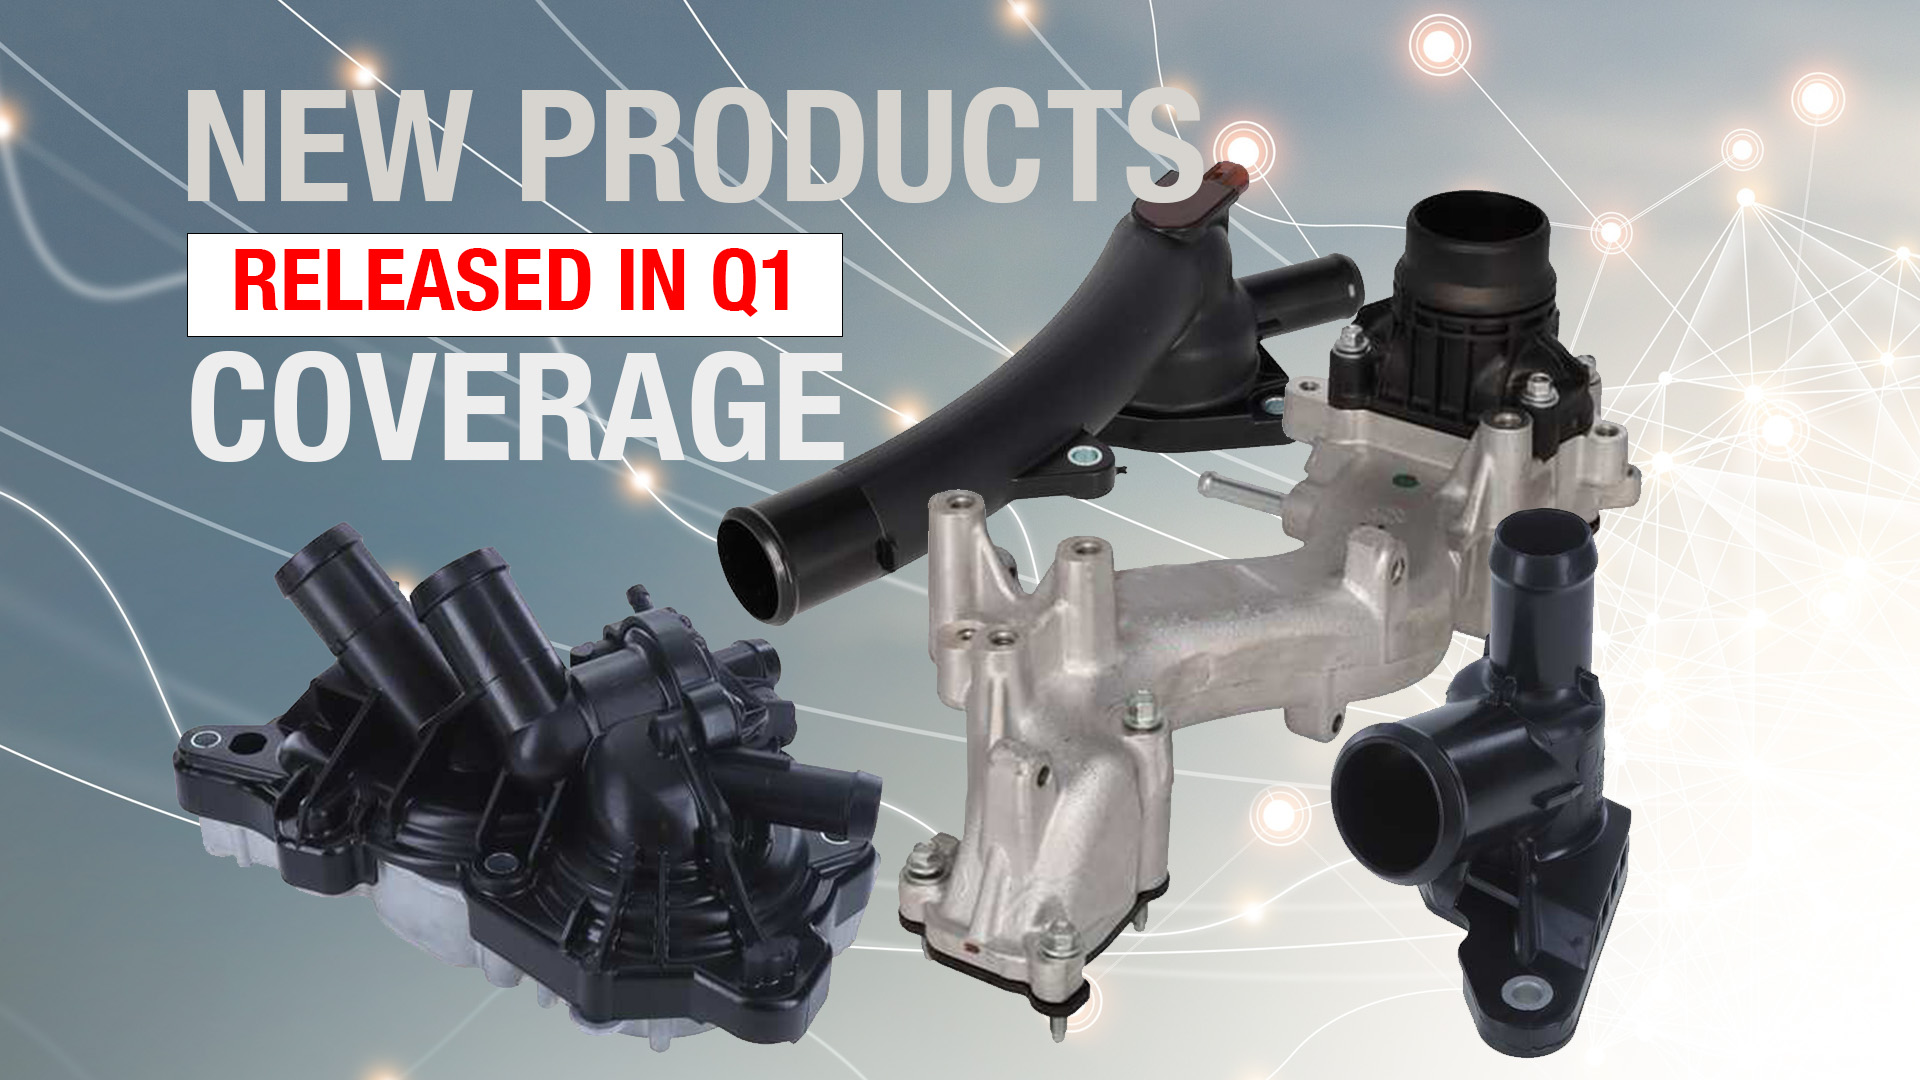 New products from MotoRad in Q1 increase coverage!